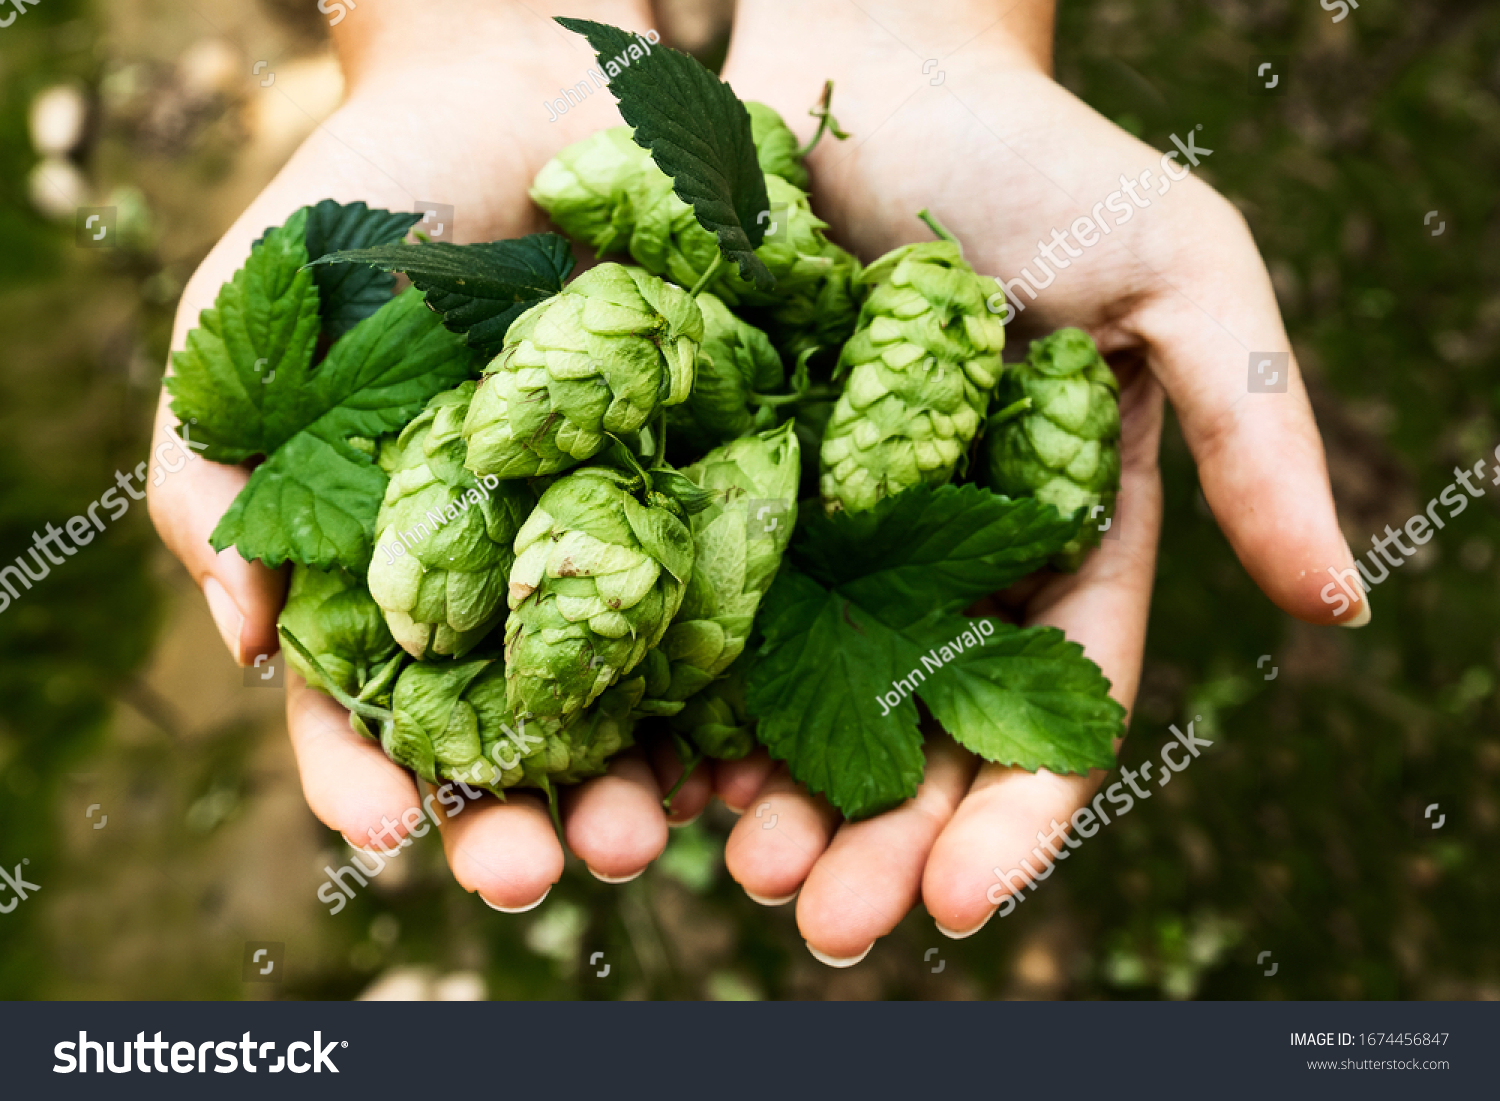 Hands of a girl holding a handful of hop cones. Leon, Spain #1674456847